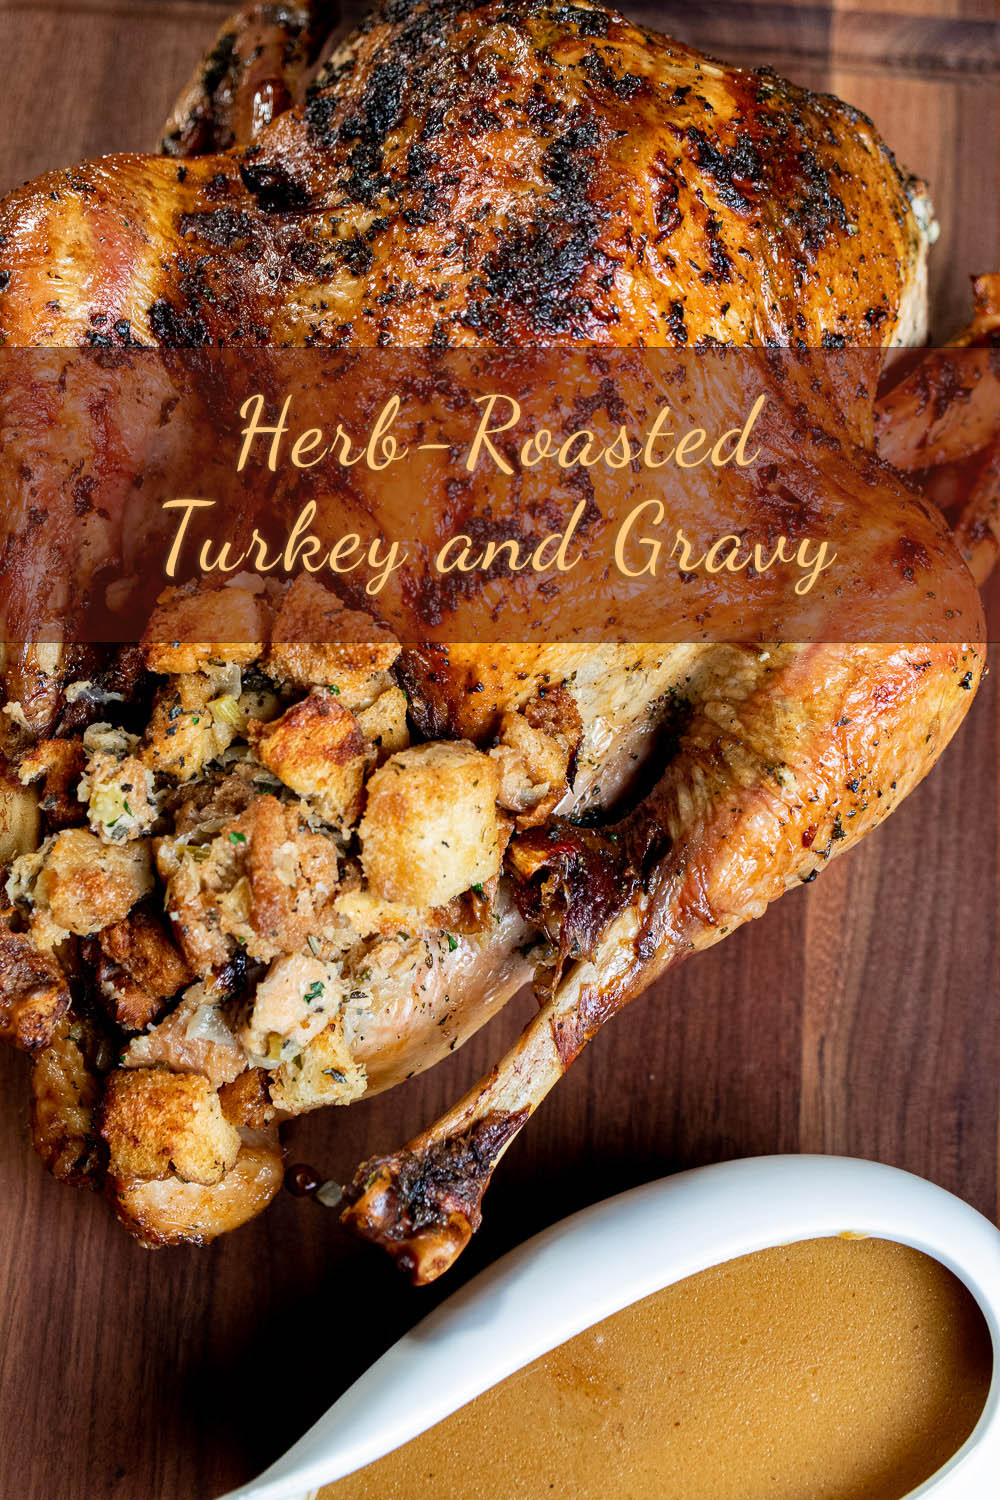 whole herb roasted turkey with stuffing and side of gravy on a wooden cutting board